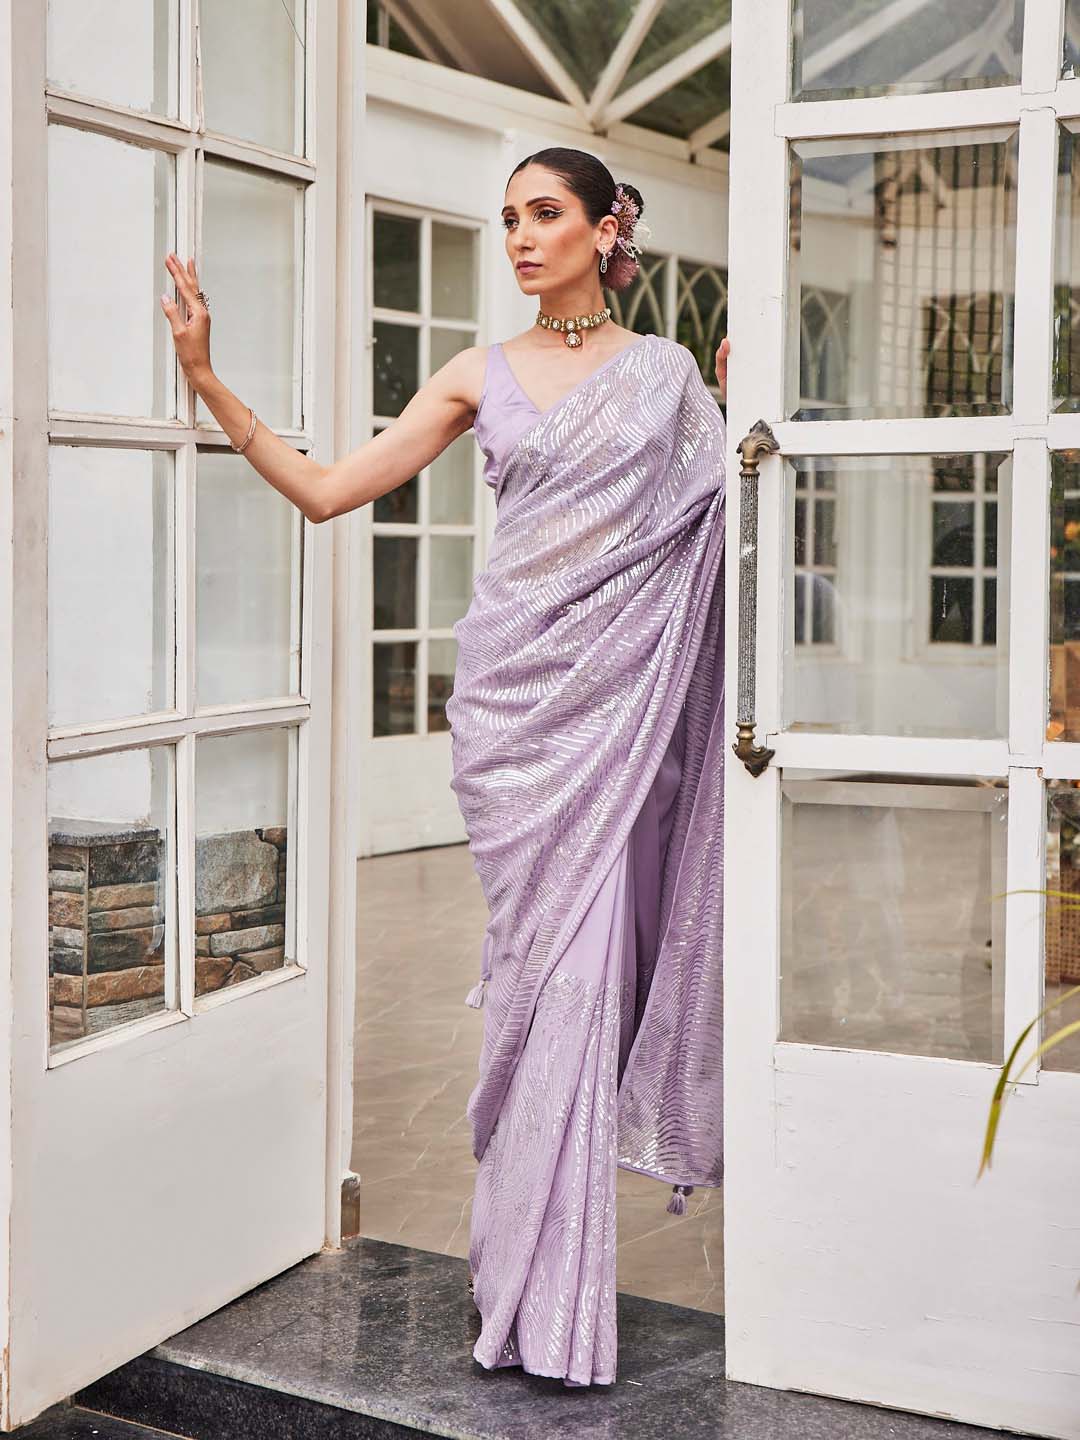 Sequin Embroidered Georgette Saree